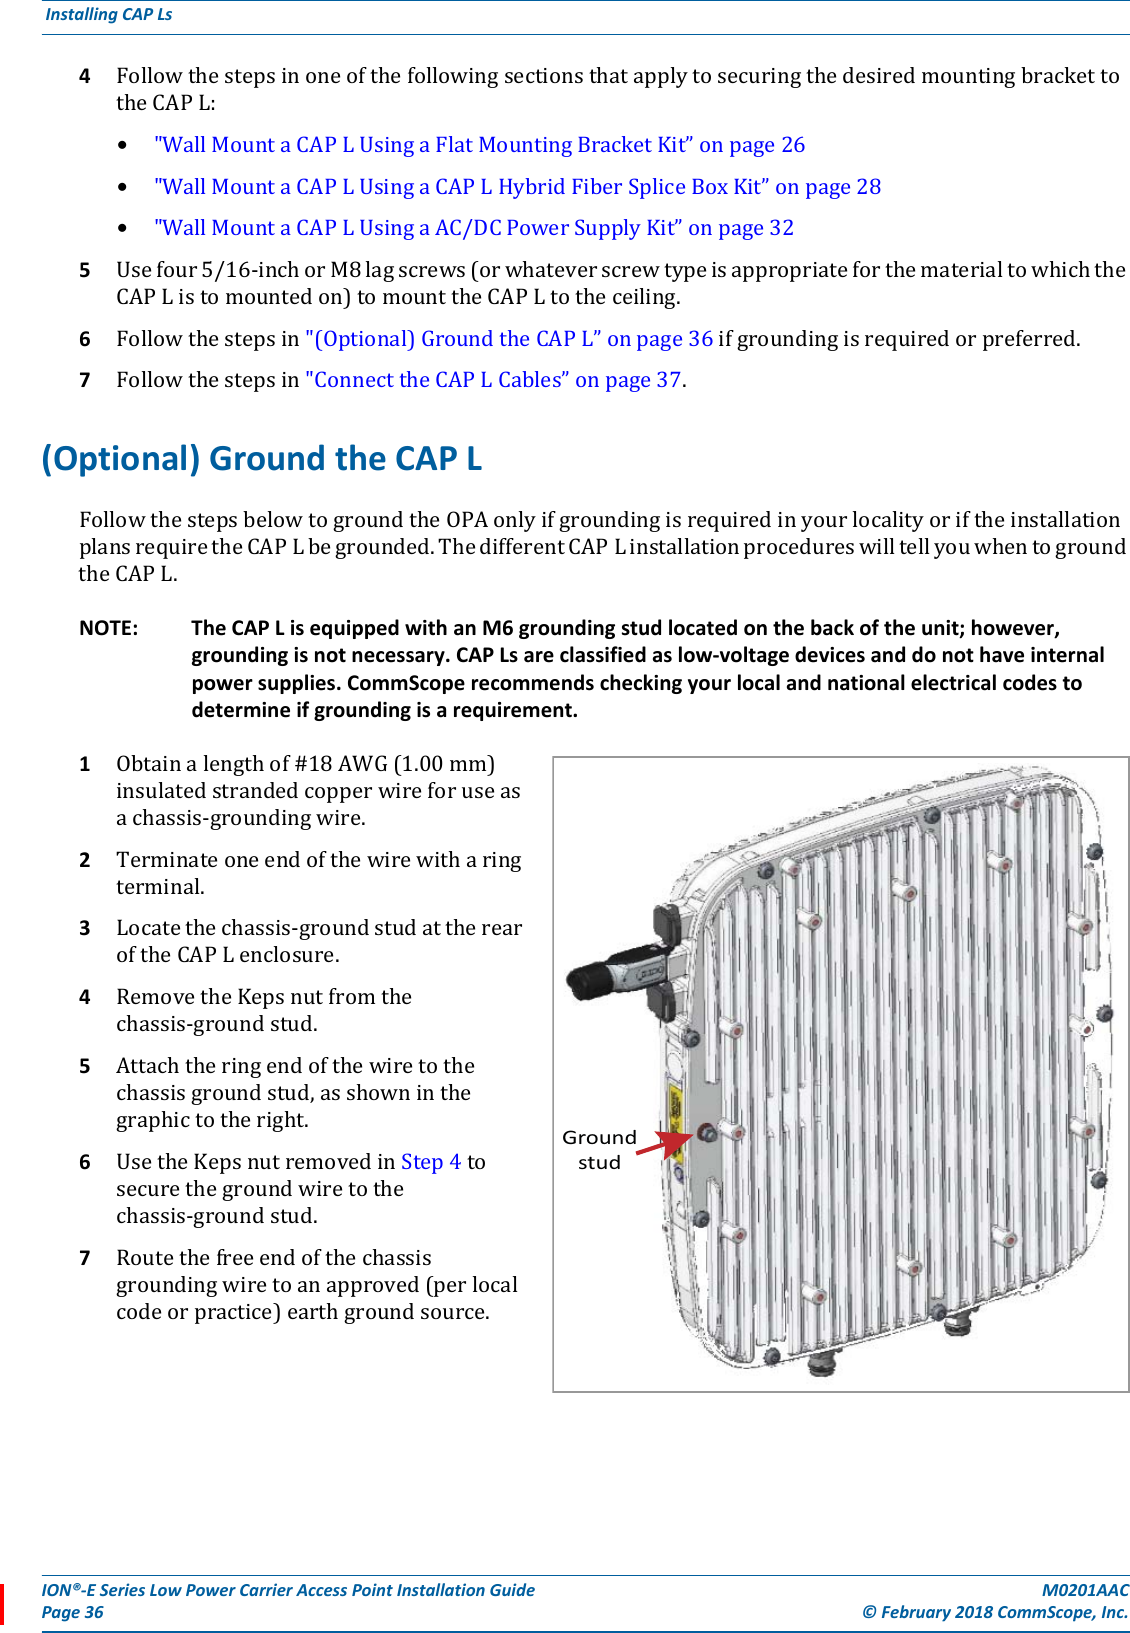 ION®-E Series Low Power Carrier Access Point Installation Guide M0201AACPage 36 © February 2018 CommScope, Inc. Installing CAP Ls  4FollowthestepsinoneofthefollowingsectionsthatapplytosecuringthedesiredmountingbrackettotheCAPL:•&quot;WallMountaCAPLUsingaFlatMountingBracketKit”onpage26•&quot;WallMountaCAPLUsingaCAPLHybridFiberSpliceBoxKit”onpage28•&quot;WallMountaCAPLUsingaAC/DCPowerSupplyKit”onpage325Usefour5/16-inchorM8lagscrews(orwhateverscrewtypeisappropriateforthematerialtowhichtheCAPListomountedon)tomounttheCAPLtotheceiling.6Followthestepsin&quot;(Optional)GroundtheCAPL”onpage36ifgroundingisrequiredorpreferred.7Followthestepsin&quot;ConnecttheCAPLCables”onpage37.(Optional) Ground the CAP LFollowthestepsbelowtogroundtheOPAonlyifgroundingisrequiredinyourlocalityoriftheinstallationplansrequiretheCAPLbegrounded.ThedifferentCAPLinstallationprocedureswilltellyouwhentogroundtheCAPL.NOTE: The CAP L is equipped with an M6 grounding stud located on the back of the unit; however, grounding is not necessary. CAP Ls are classified as low-voltage devices and do not have internal power supplies. CommScope recommends checking your local and national electrical codes to determine if grounding is a requirement. 1Obtainalengthof#18AWG(1.00mm)insulatedstrandedcopperwireforuseasachassis-groundingwire.2Terminateoneendofthewirewitharingterminal.3Locatethechassis-groundstudattherearoftheCAPLenclosure.4RemovetheKepsnutfromthechassis-groundstud.5Attachtheringendofthewiretothechassisgroundstud,asshowninthegraphictotheright.6UsetheKepsnutremovedinStep4tosecurethegroundwiretothechassis-groundstud.7Routethefreeendofthechassisgroundingwiretoanapproved(perlocalcodeorpractice)earthgroundsource.Groundstud